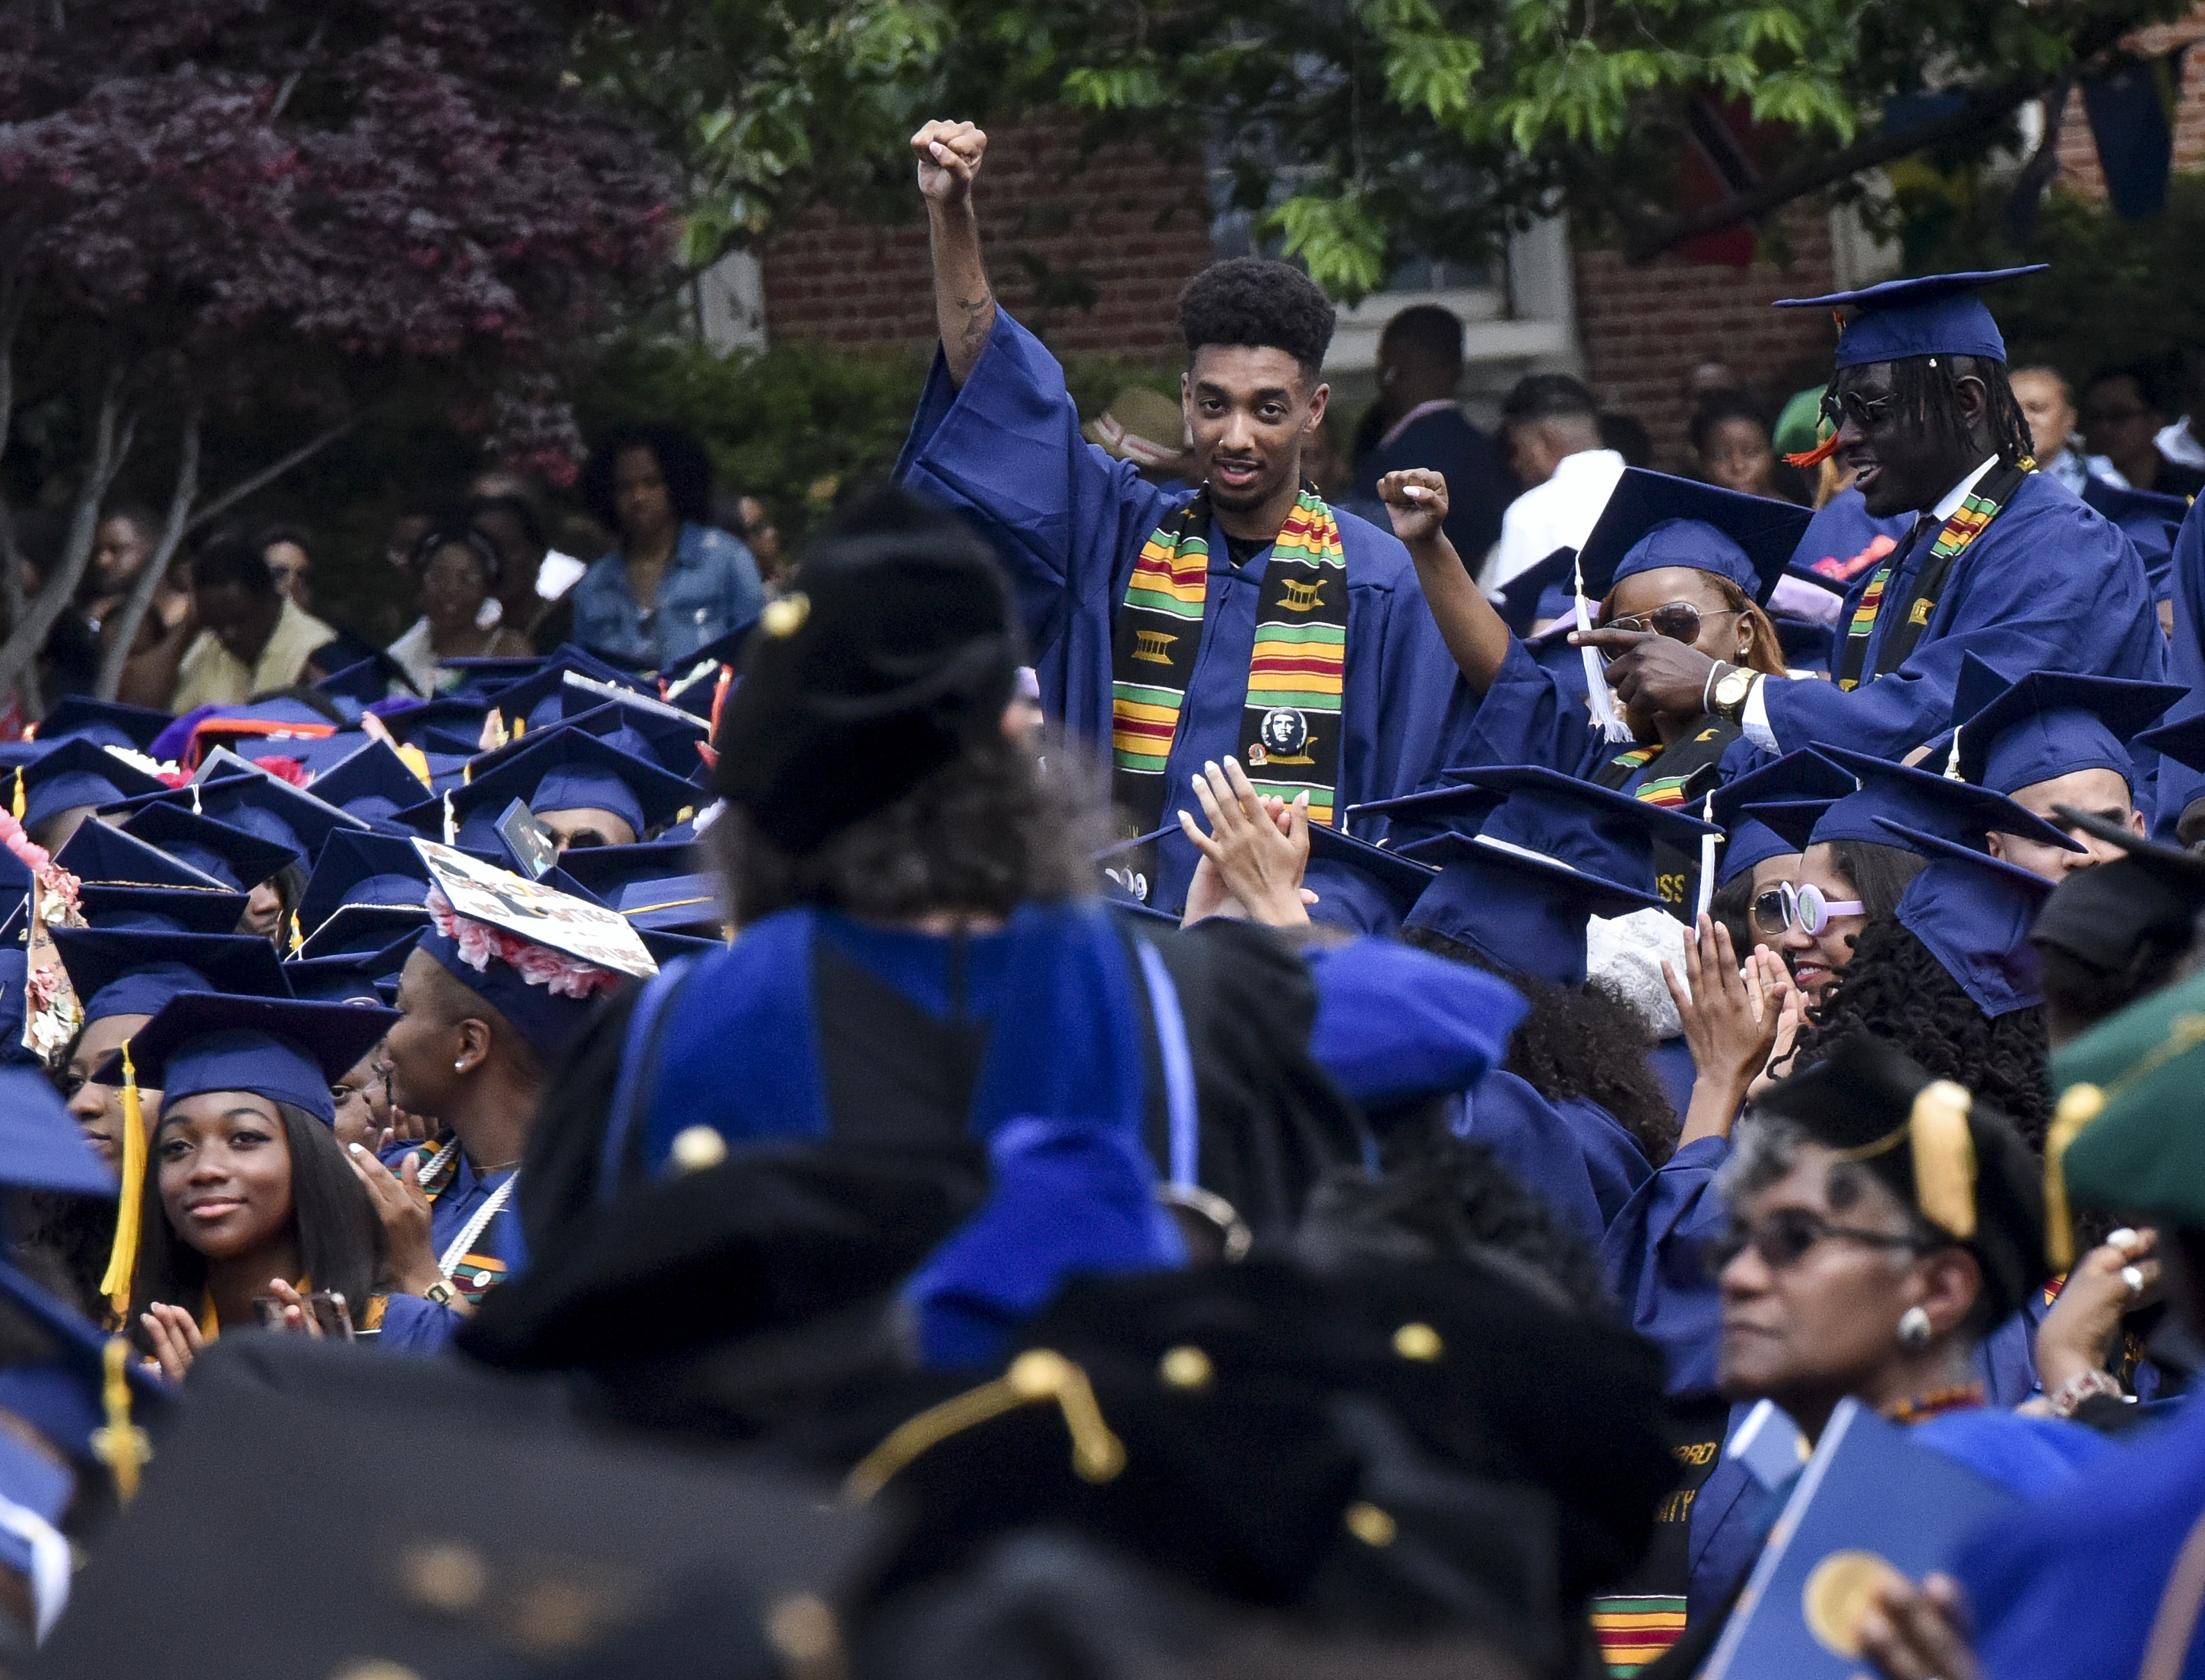 Howard University holds its' commencement ceremonies with famous alum Chadwick Boseman as guest speaker in Washington, DC.